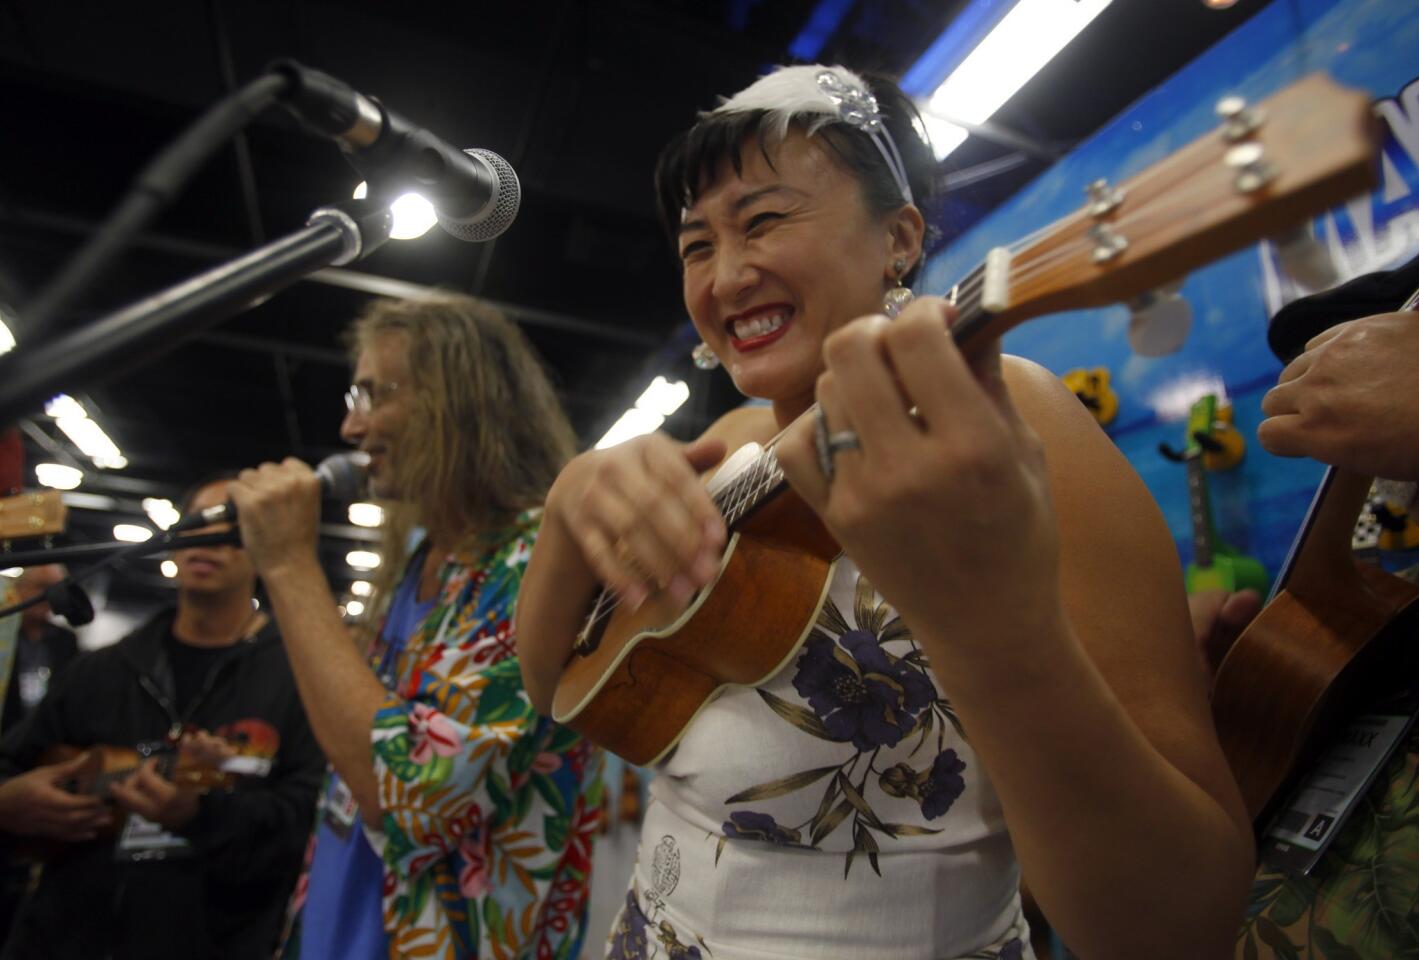 Claudia Choi plays a few licks at the Mahalo Ukulele booth at the NAMM Show in Anaheim.